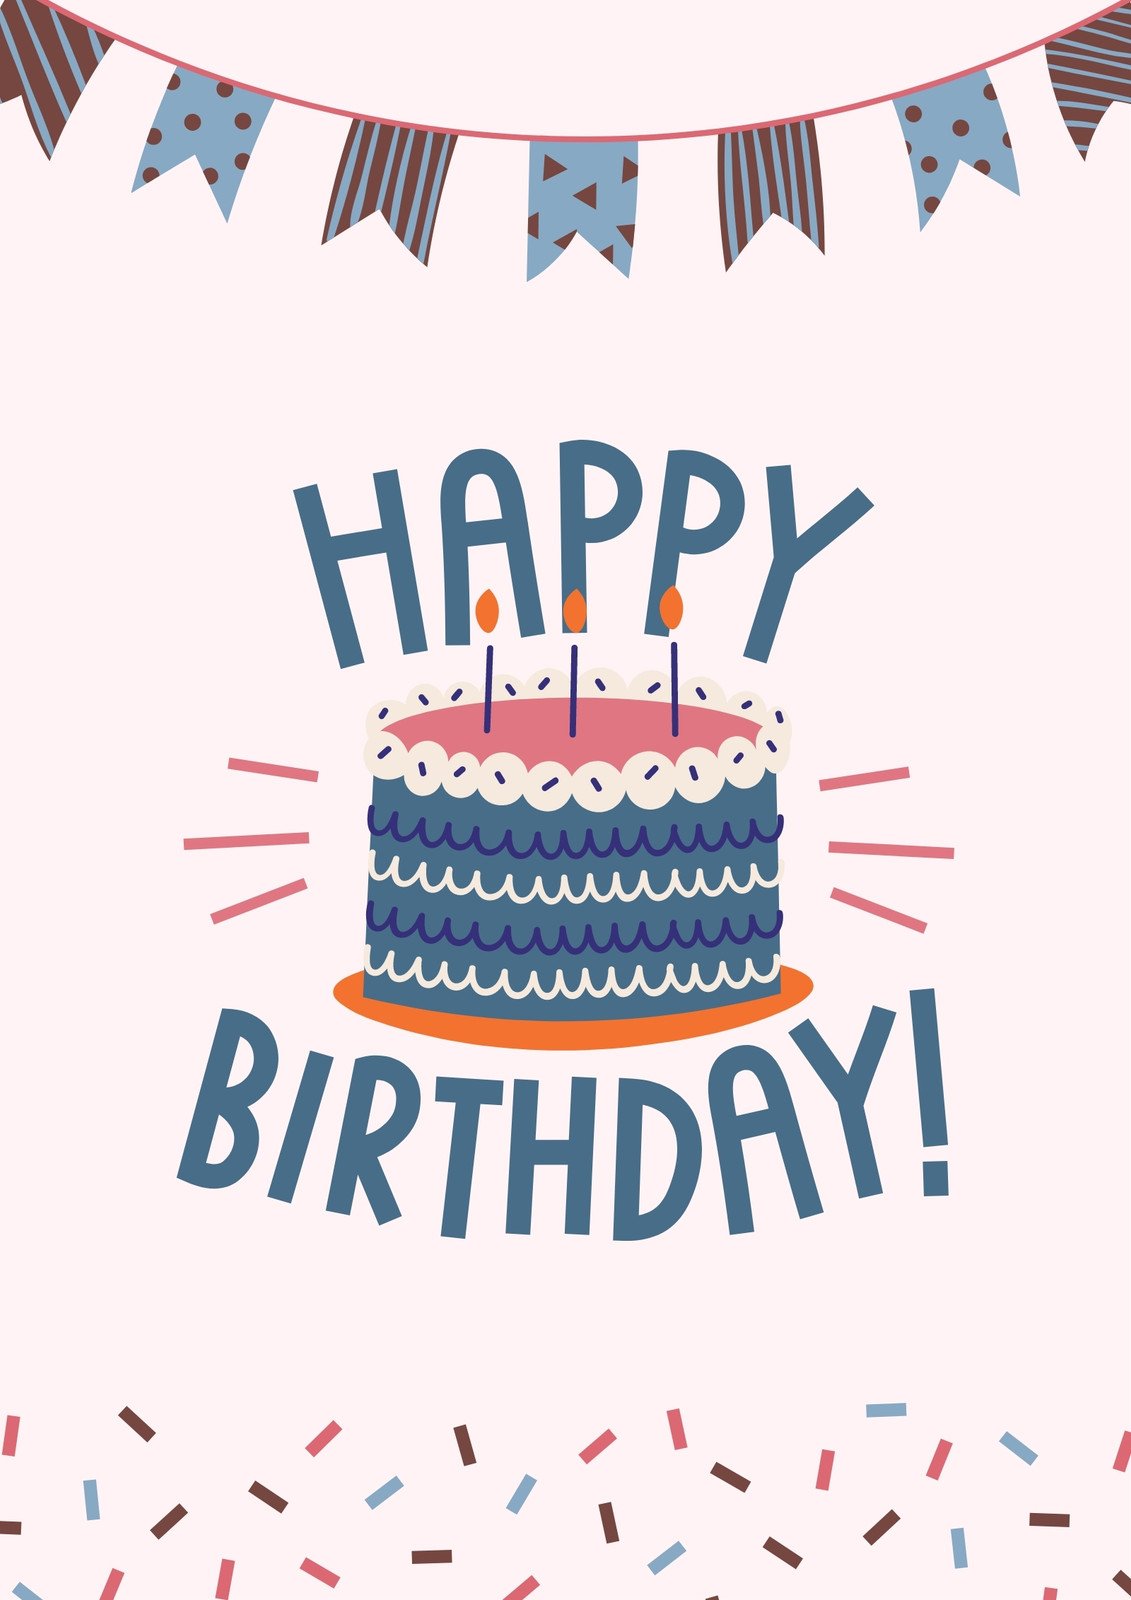 Free and fun birthday poster